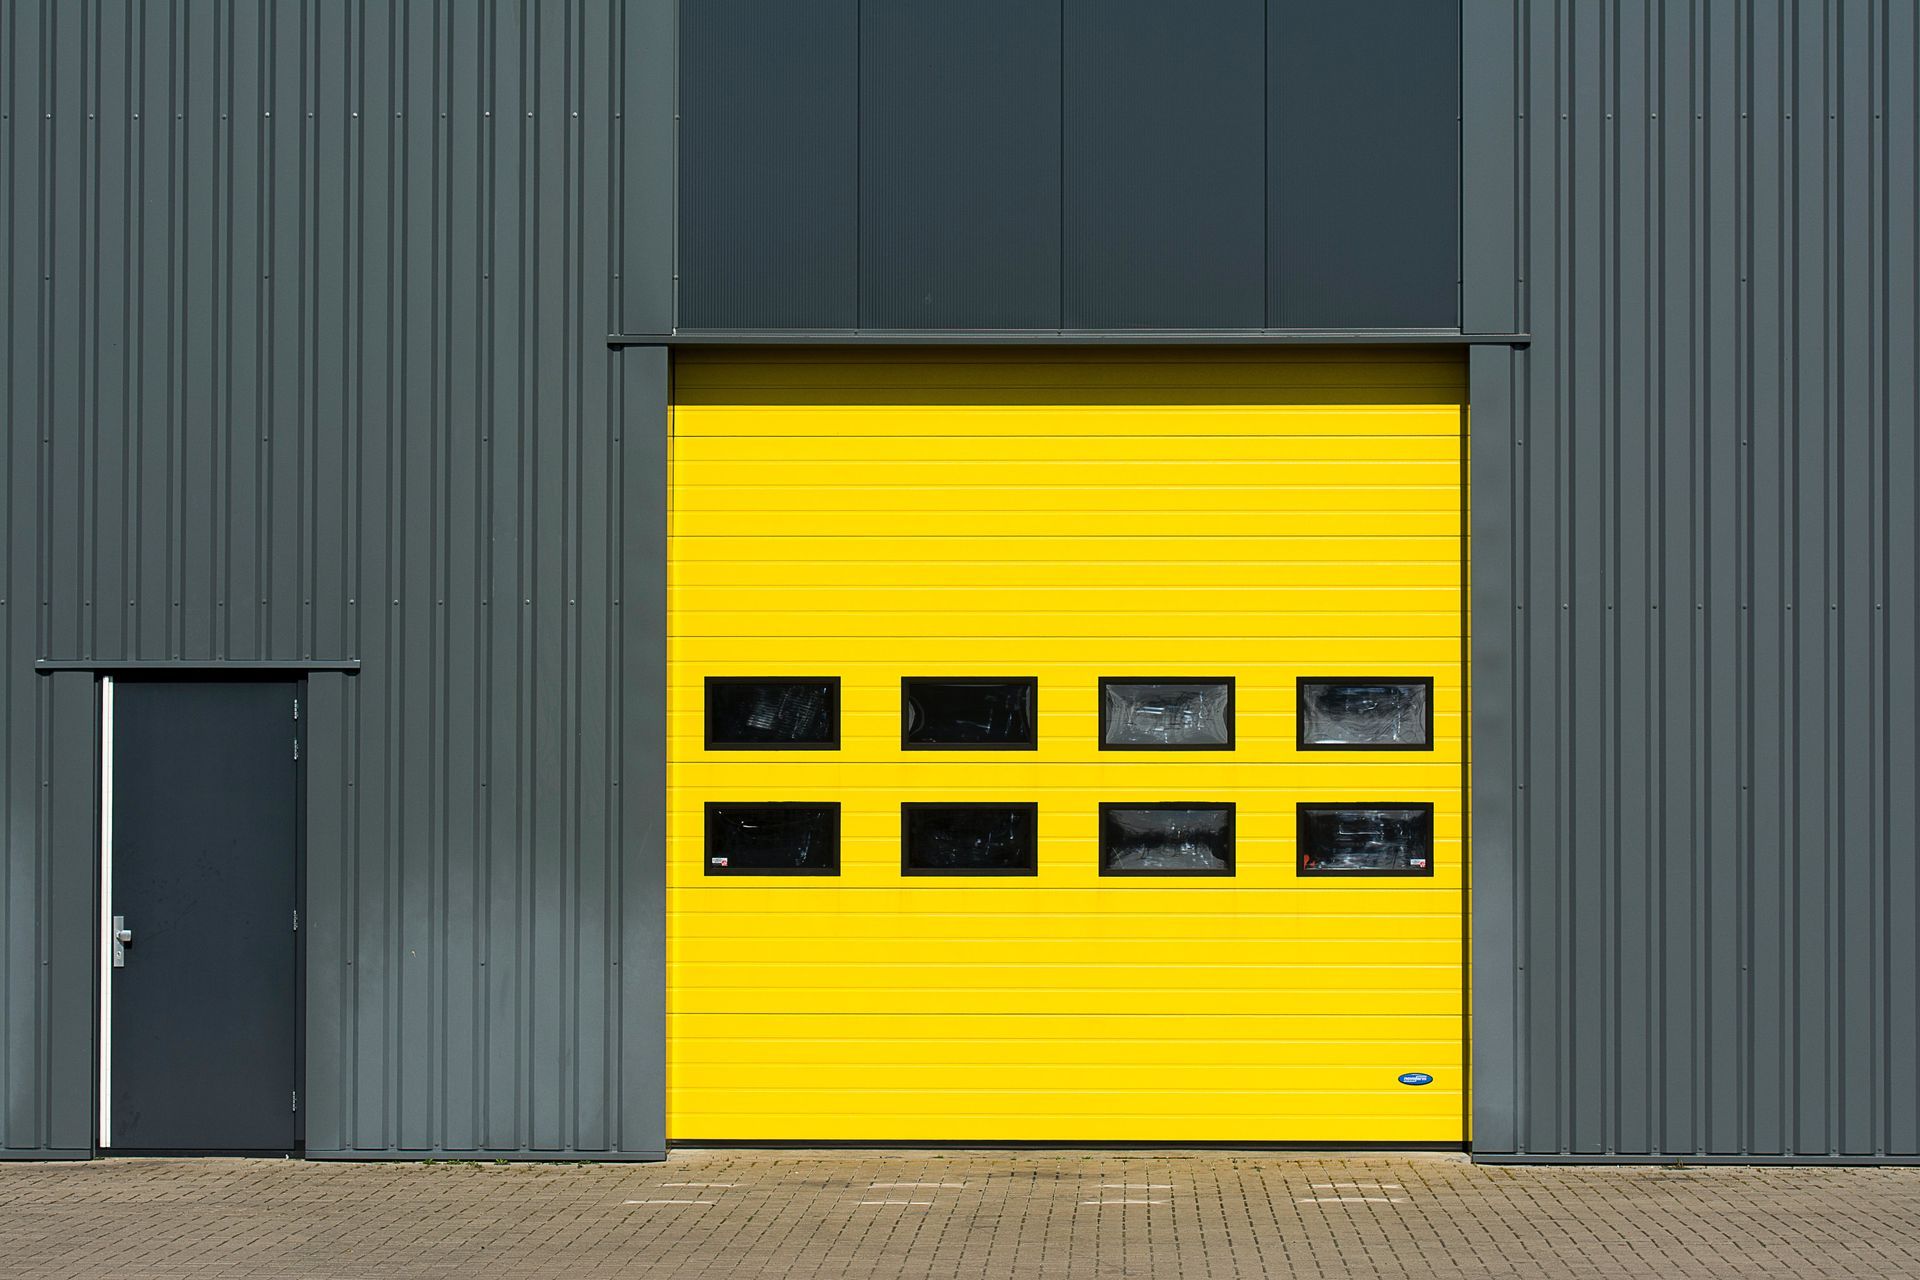 Yellow garage door with a textured surface and windows at the middle.